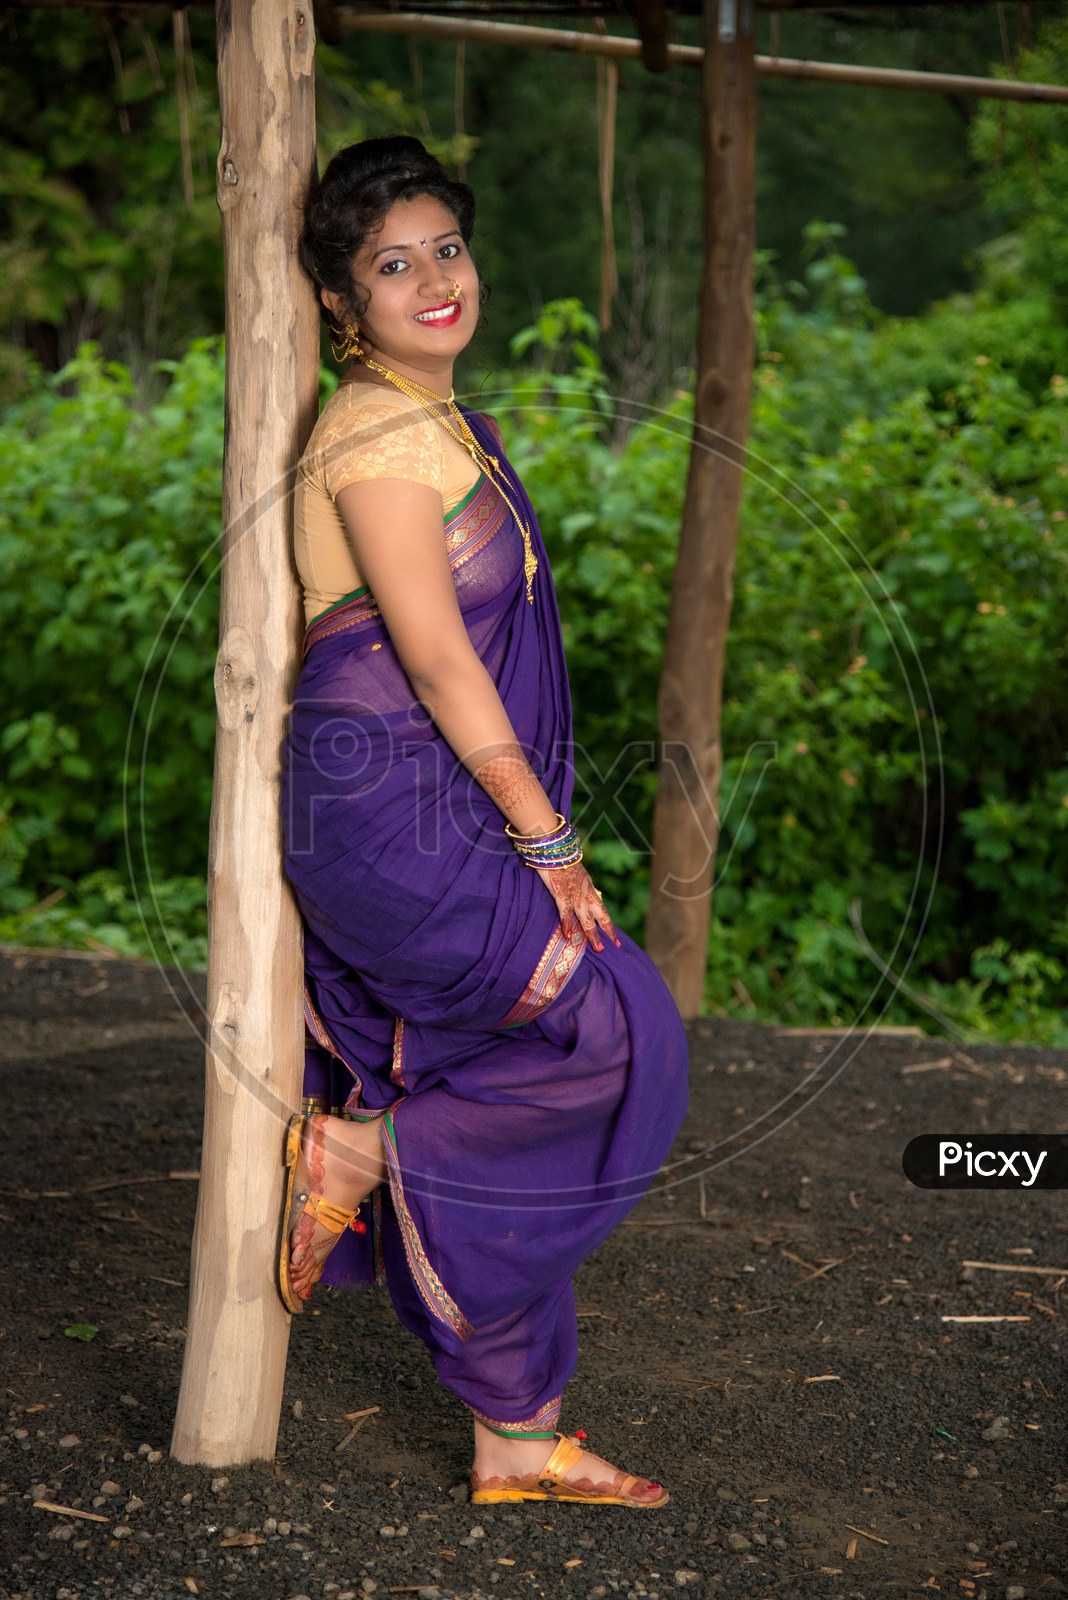 Image of Indian traditional Beautiful Woman Wearing an traditional Saree  And Posing On The Outdoor With a Smile Face-US485157-Picxy